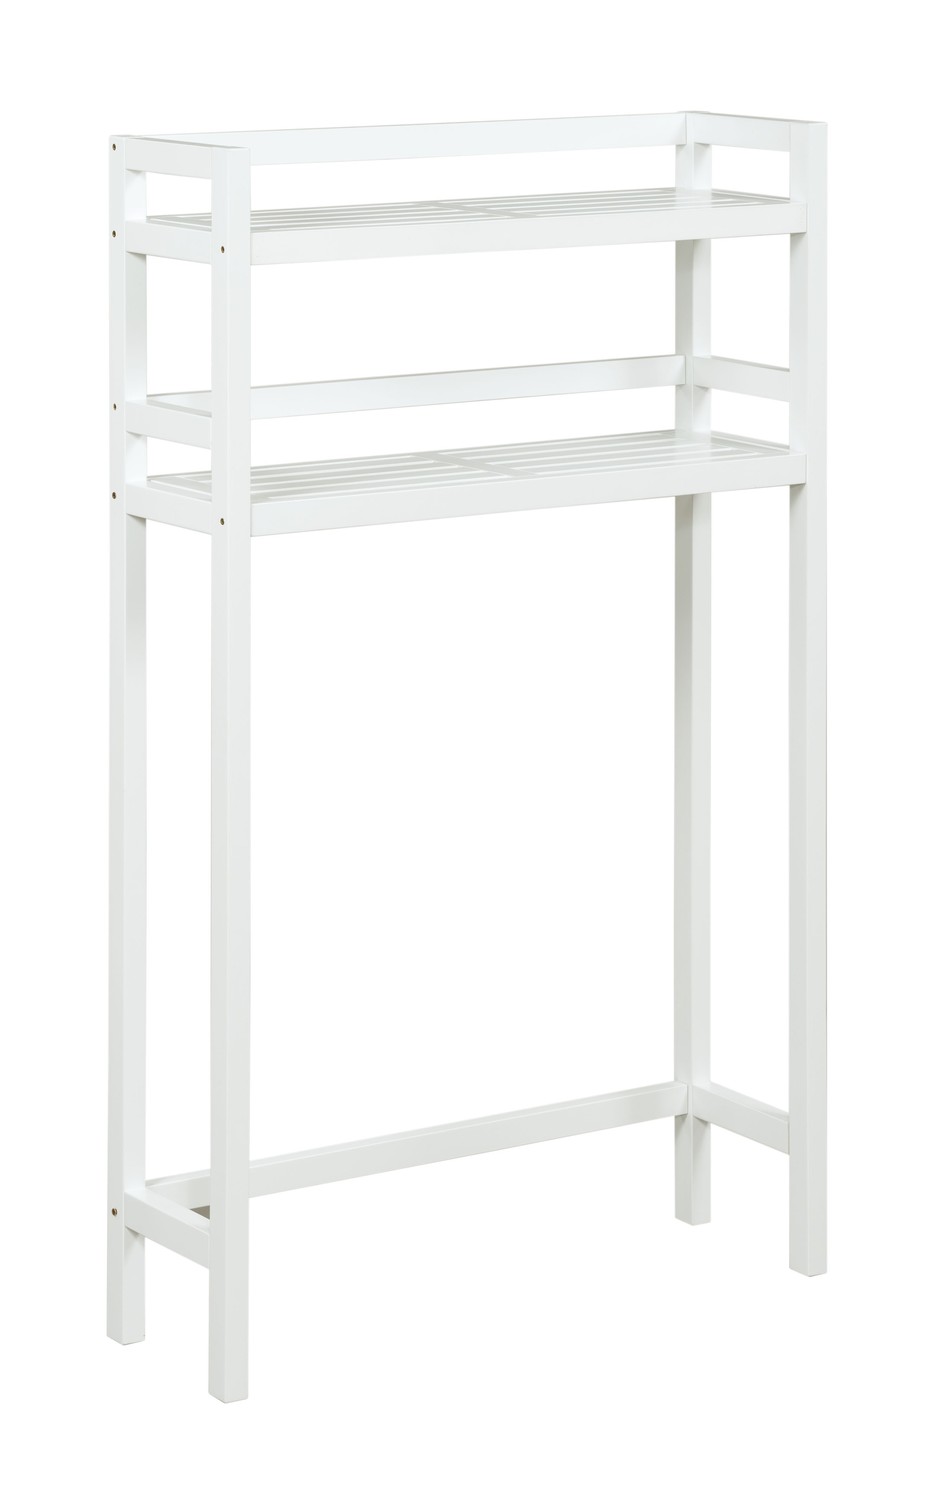 48" Bathroom Extra Storage with 2 Shelves in White